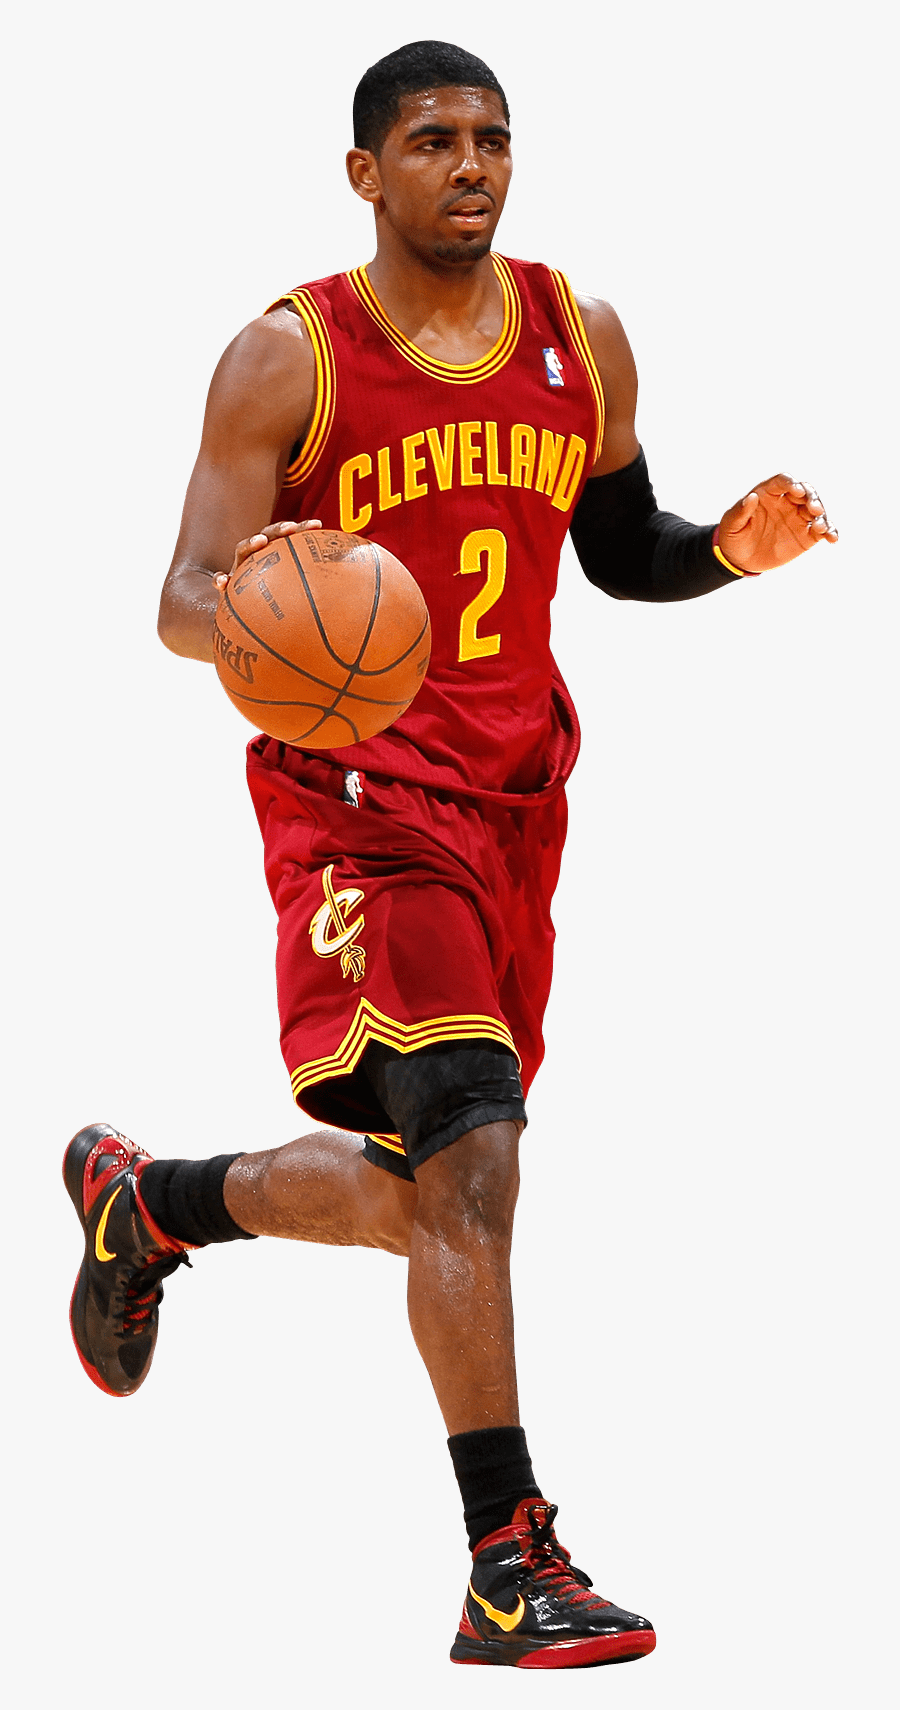 Kyrie Irving Slow Play - Transparent Basketball Player Png, Transparent Clipart